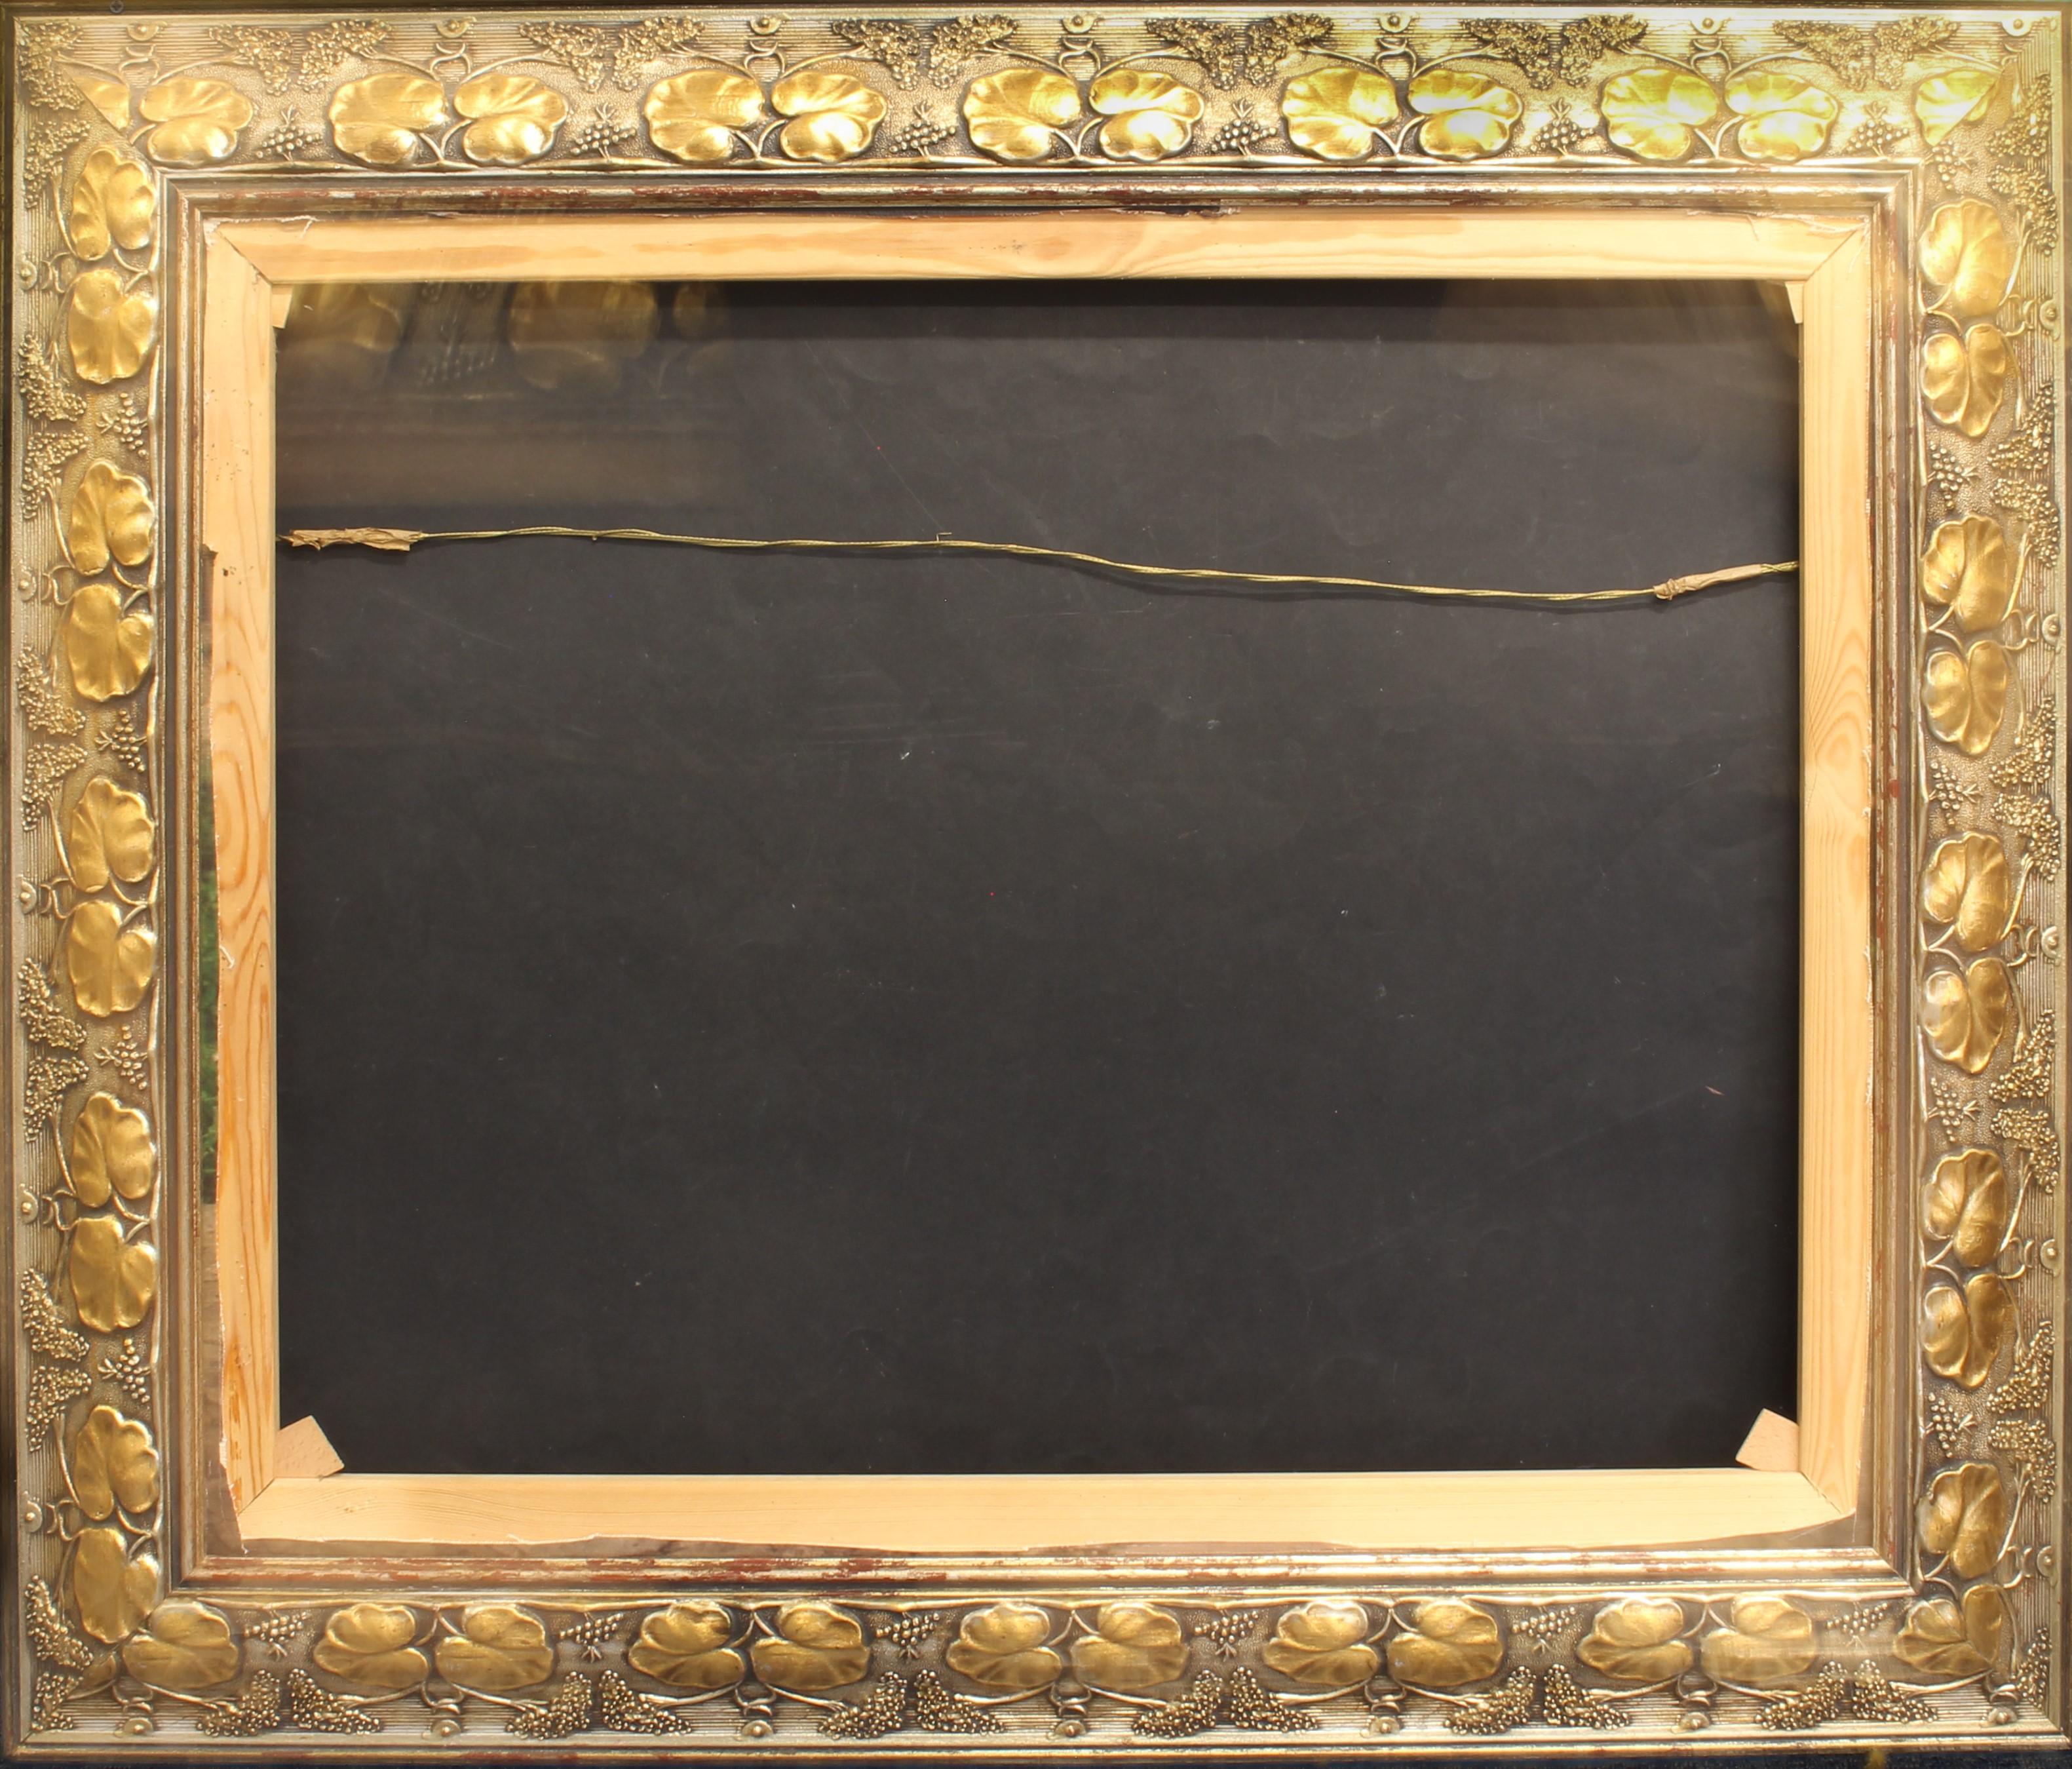 Five large modern antique-style wooden picture frames - gilt and painted finishes, various sizes. - Image 4 of 6